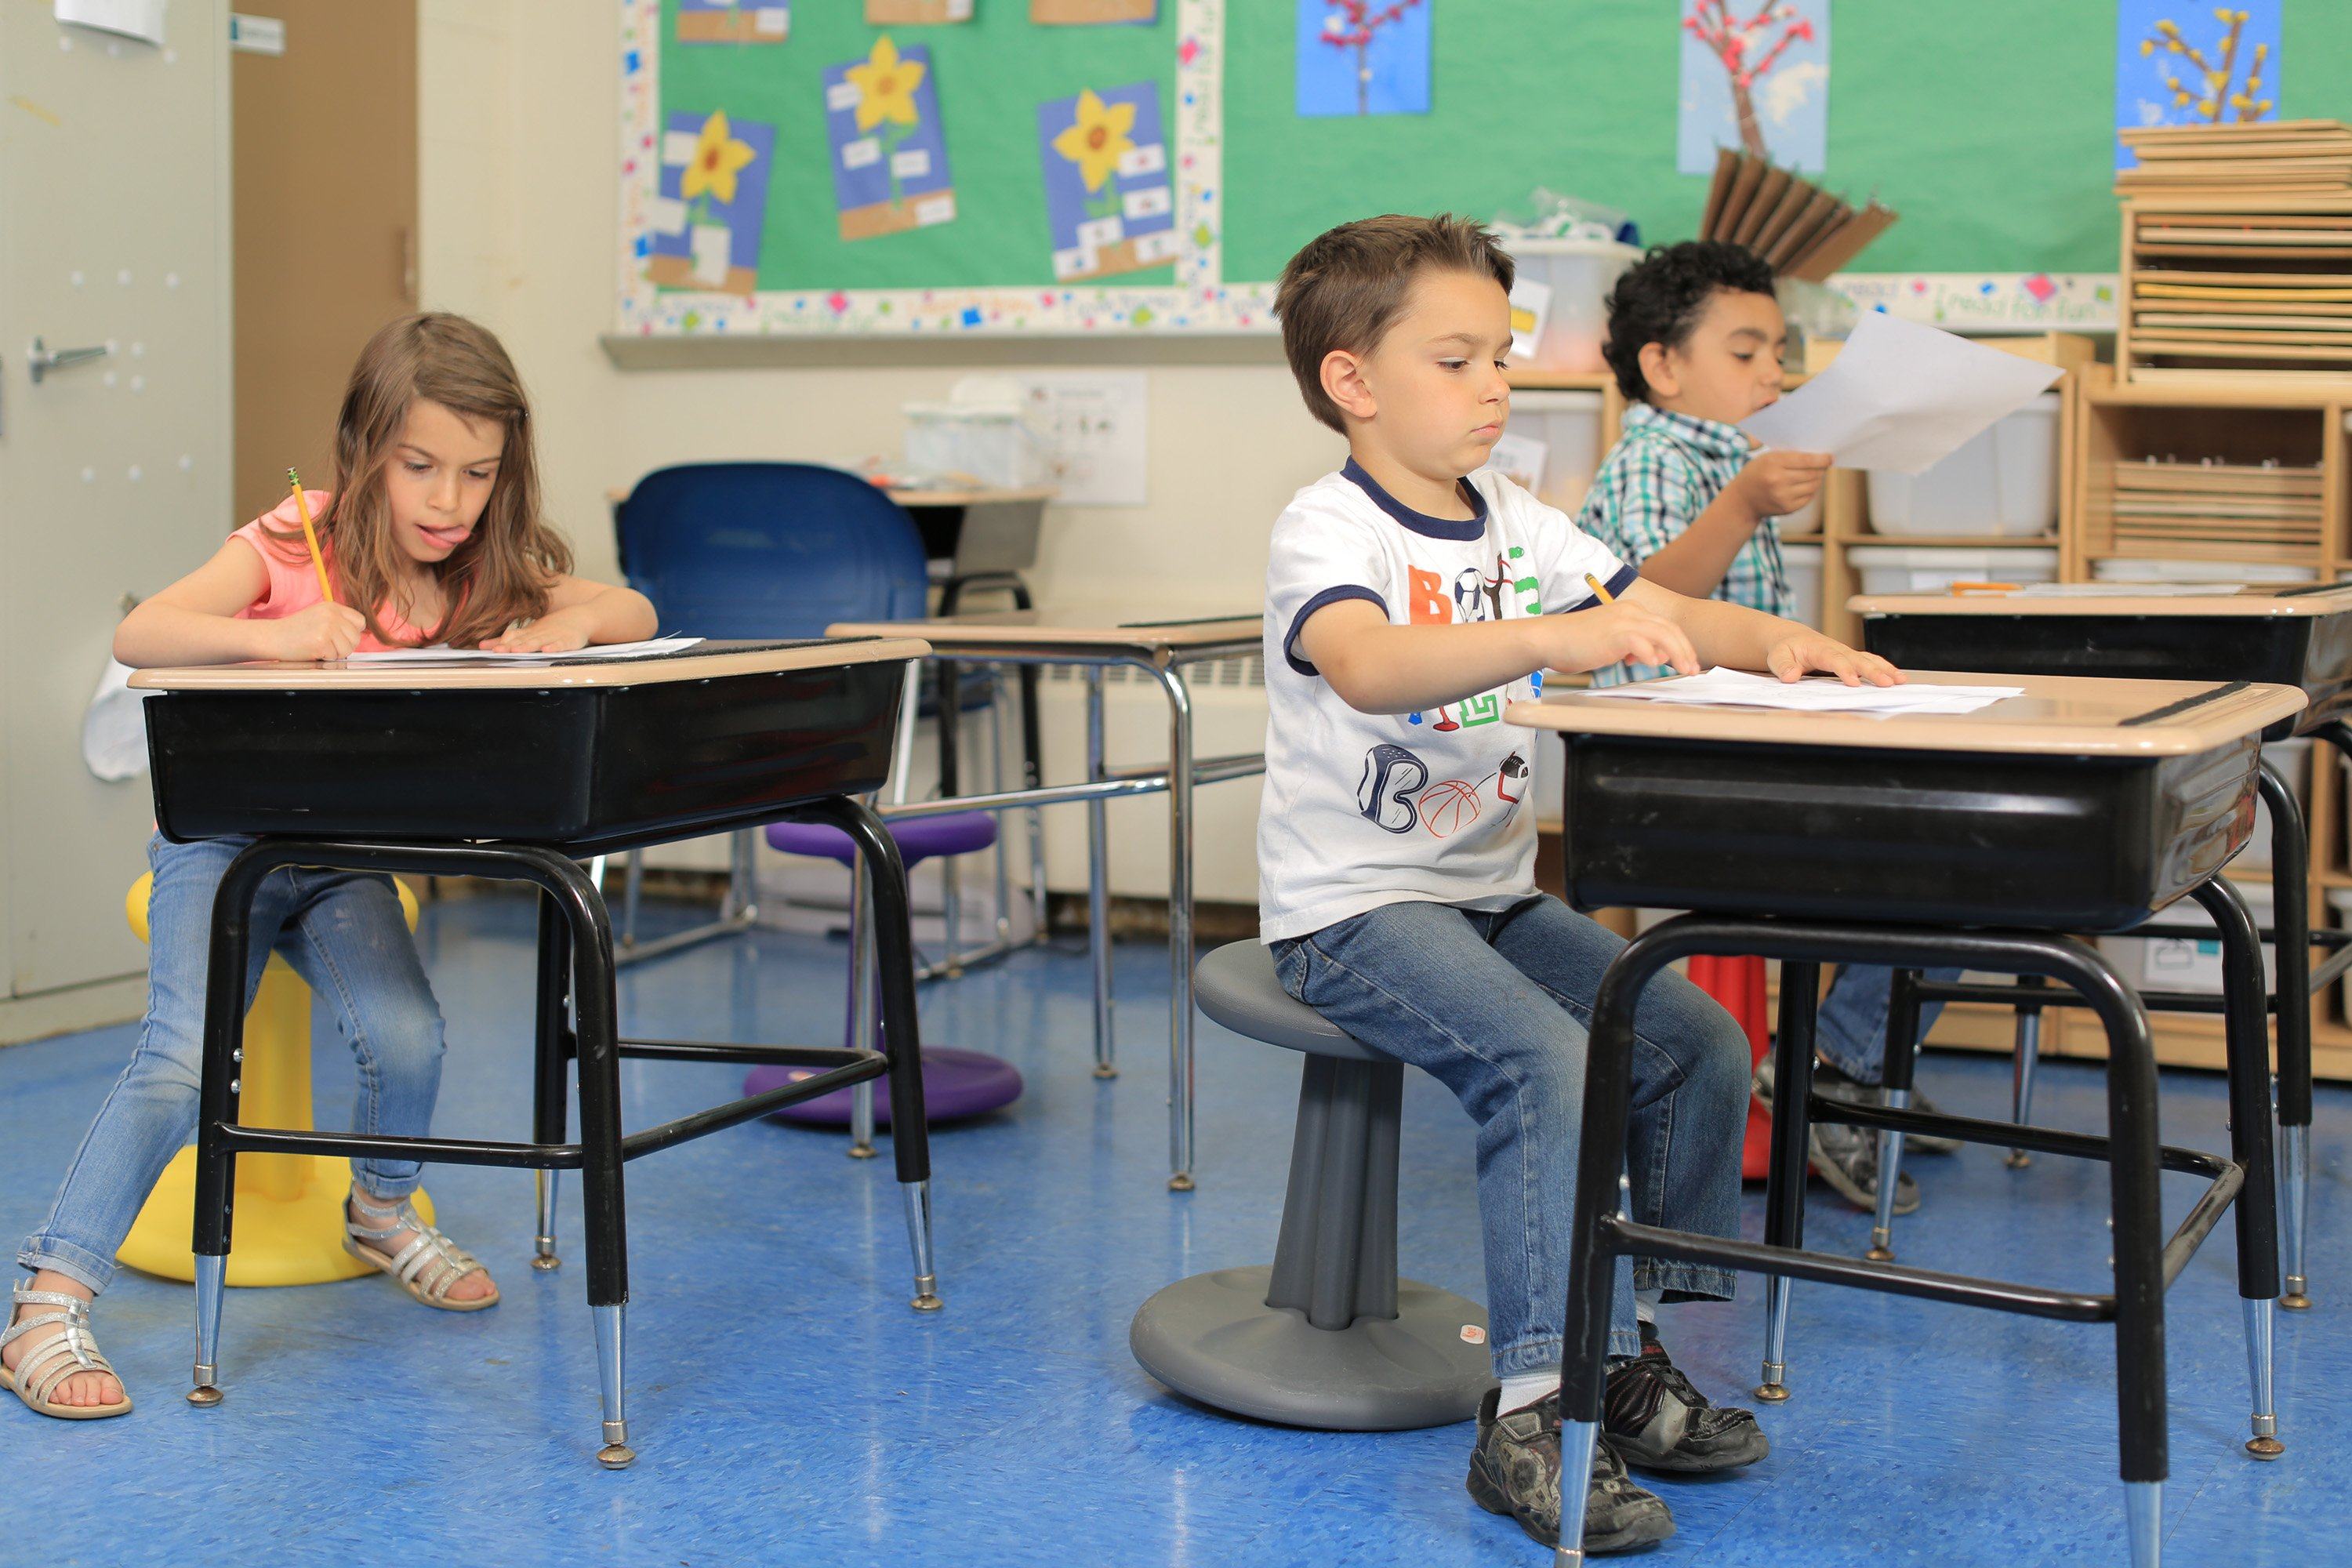 Kids using Kore Kids Wobble Chair 14" in classroom from Active Goods Canada